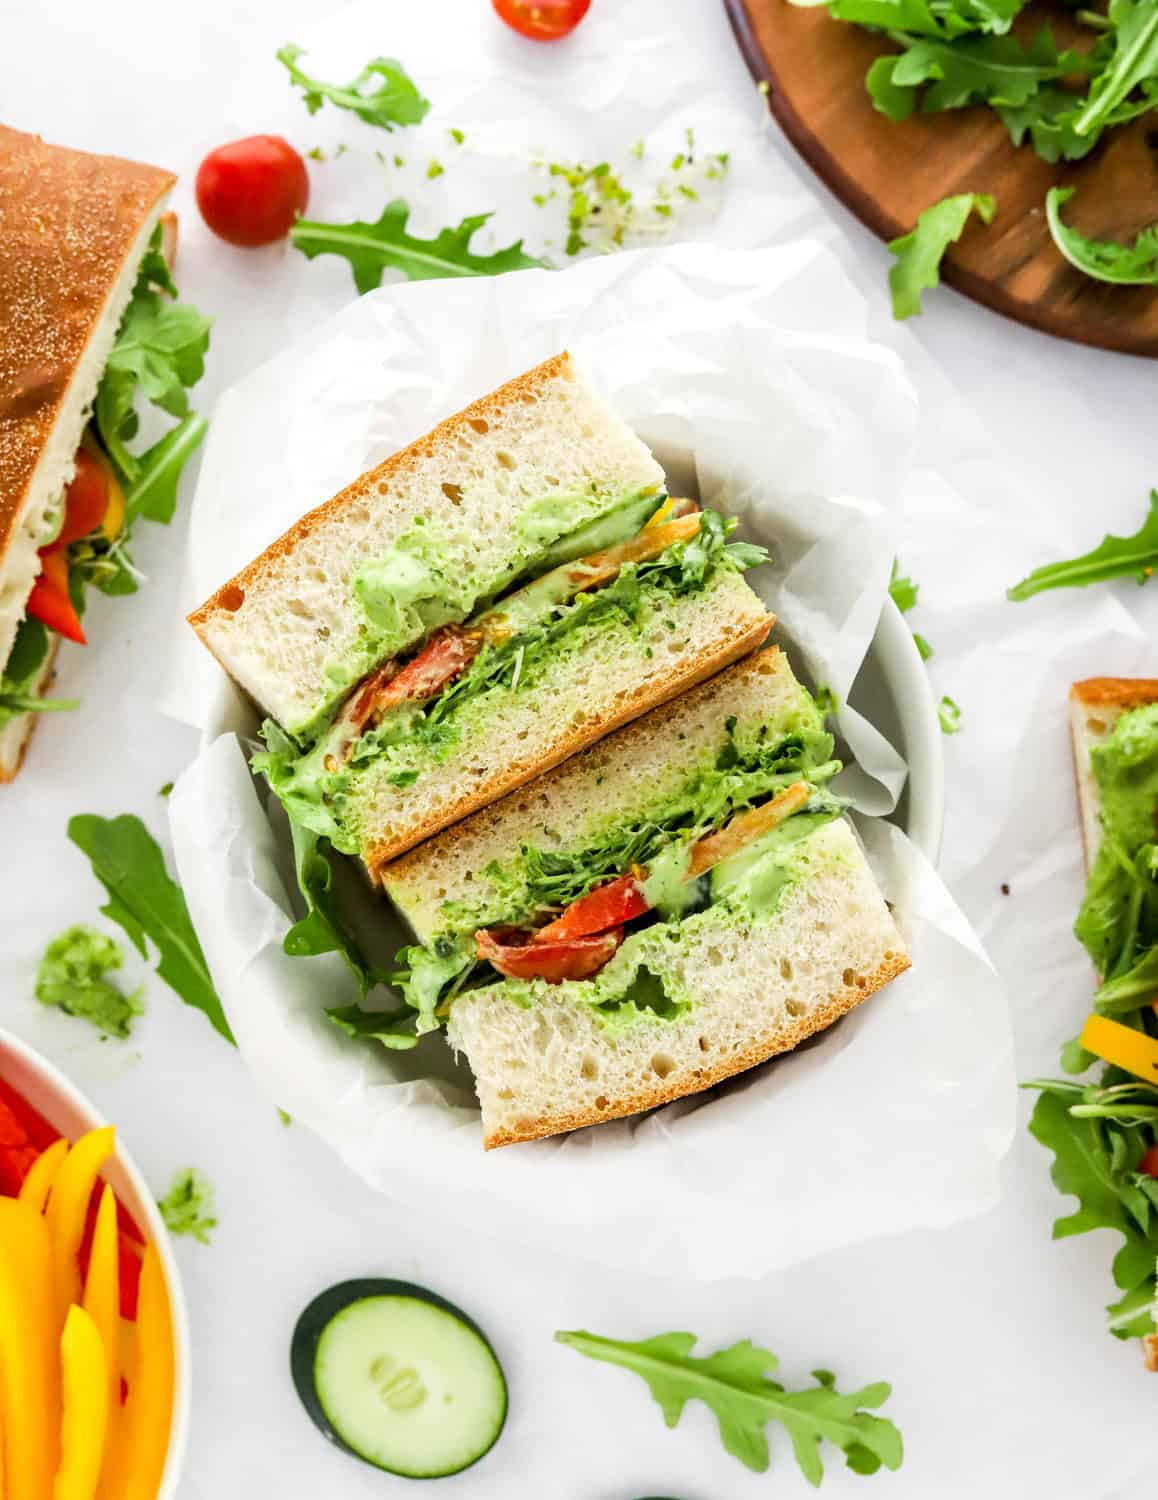 Vegan sandwich loaded with veggies and a creamy green dressing in between large slices of bread in a bowl with more sandwiches around it. 